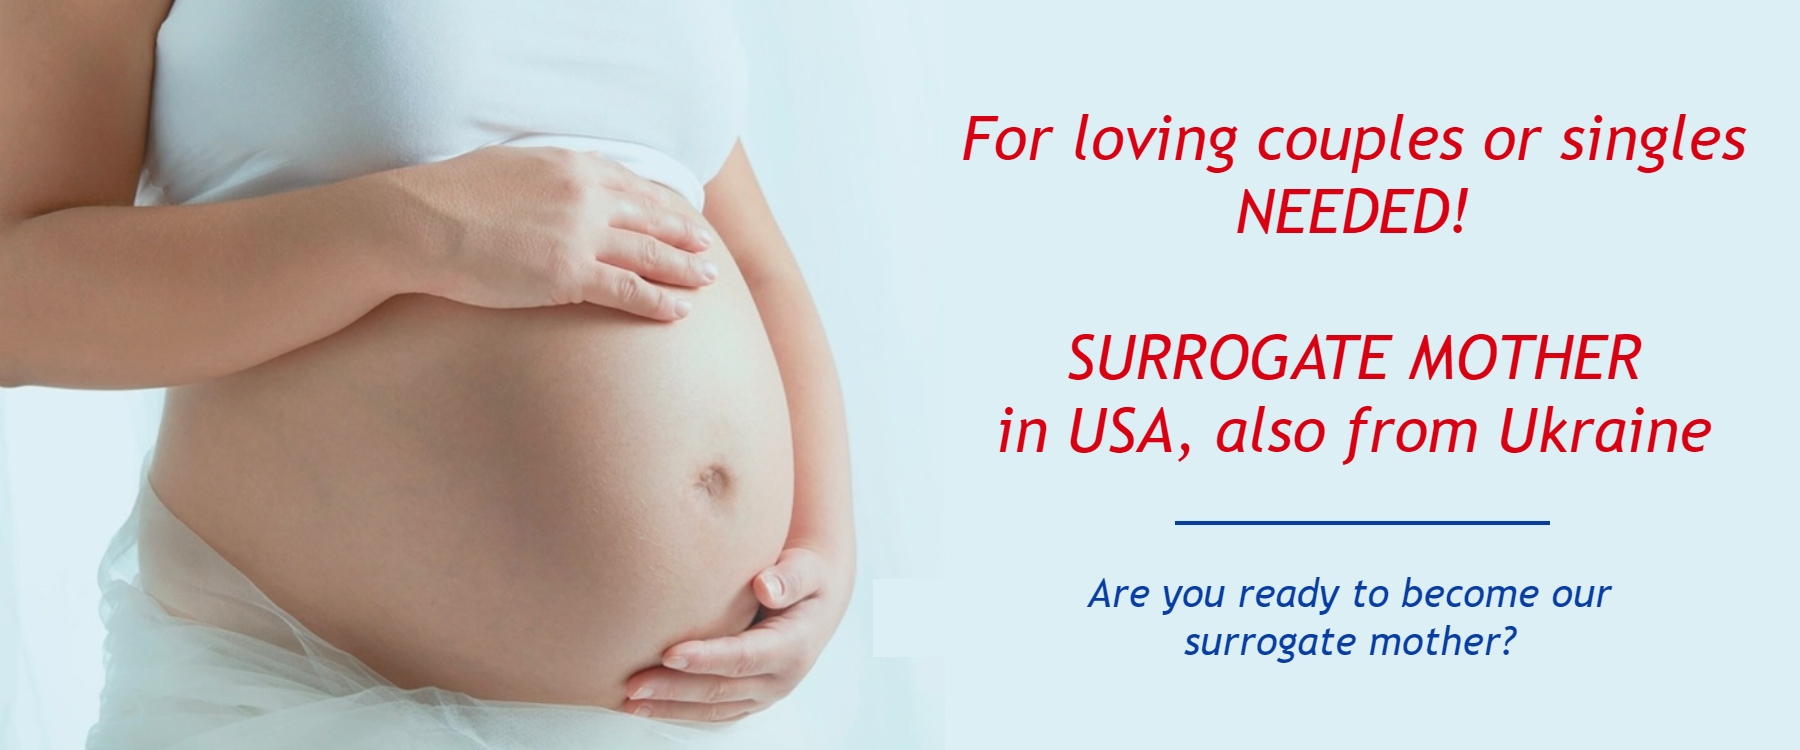 Become a surrogate mother? For additional information please contact our agency